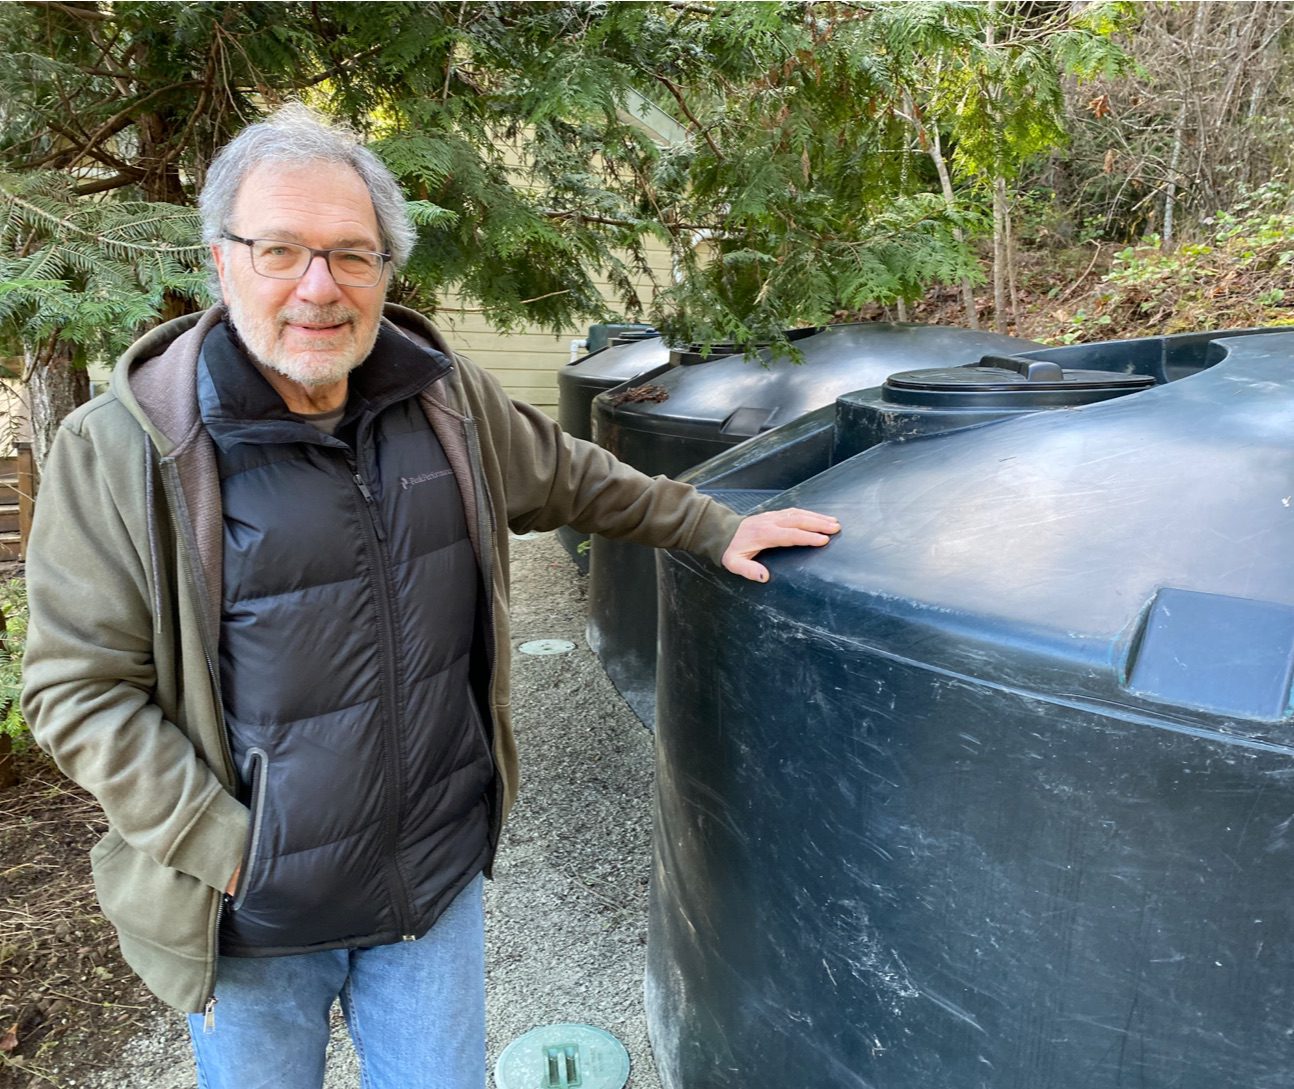 "Thanks to Transition Salt Spring for organizing this program - an incentive to me to add to our rainwater system - without which we would not have gone ahead this year" - John Metzger